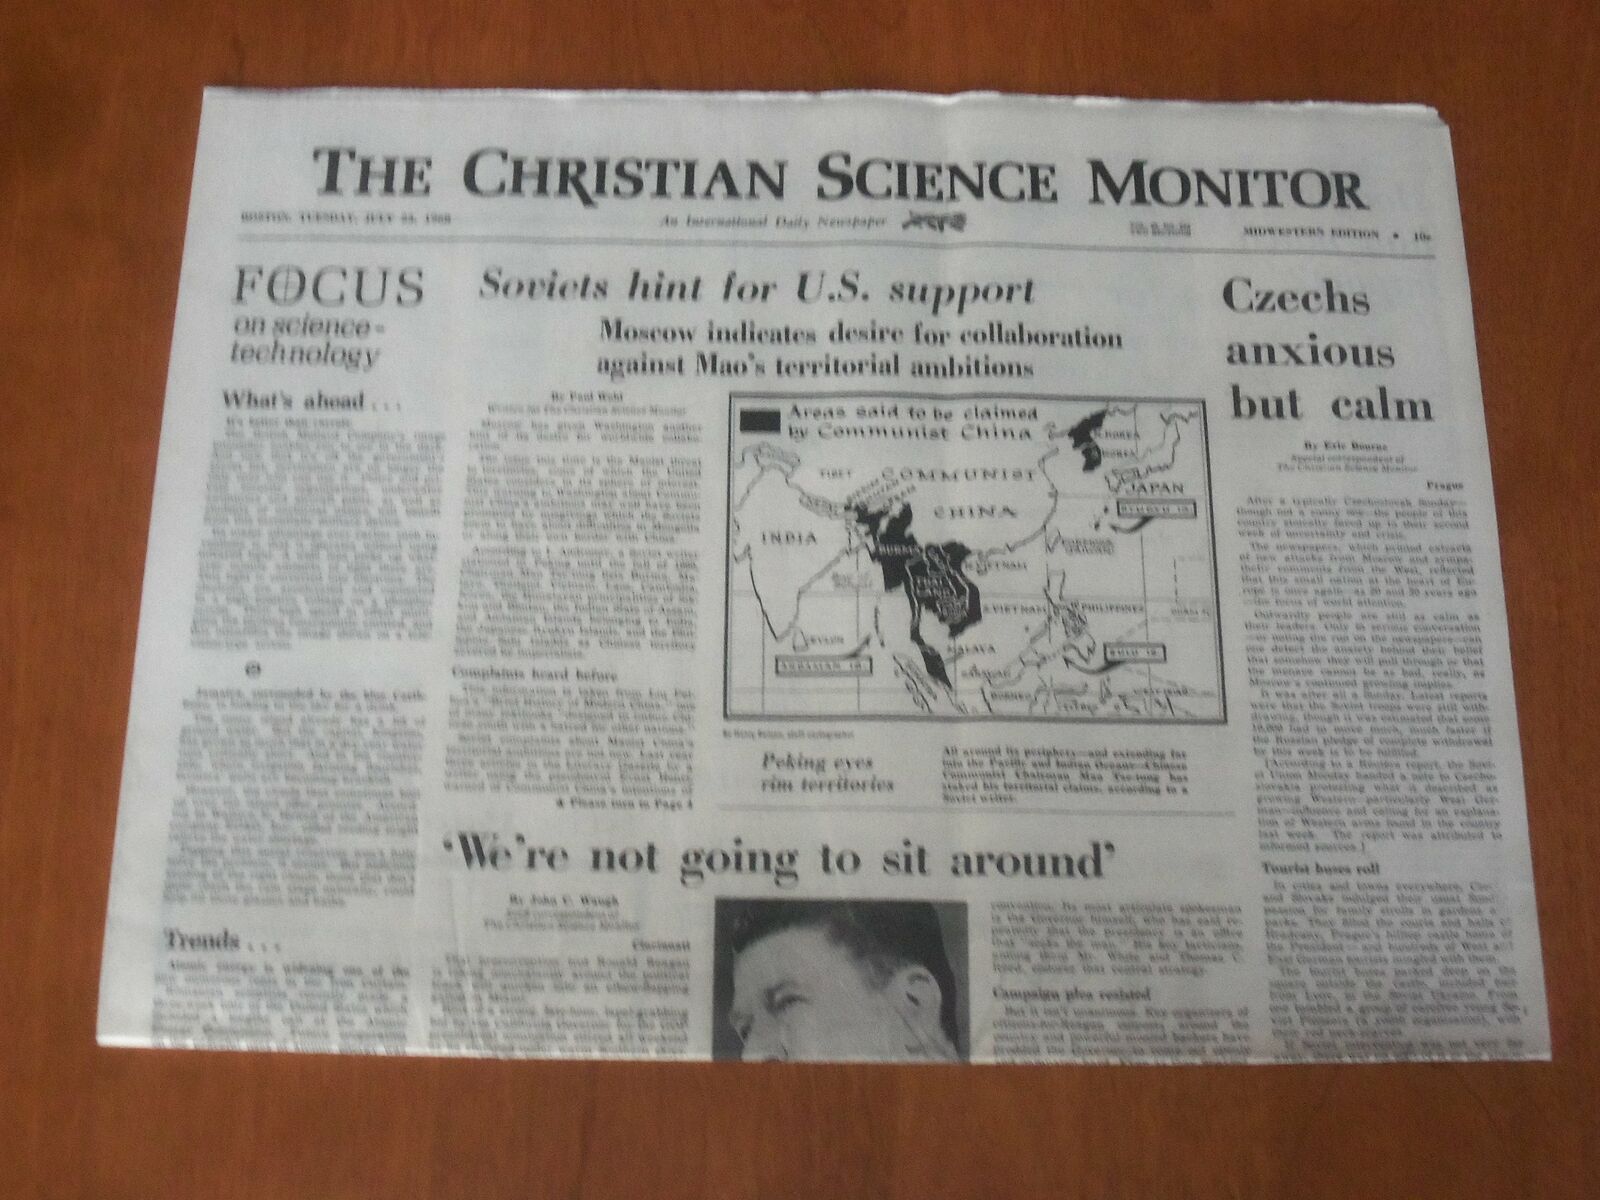 1968 JULY 23 THE CHRISTIAN SCIENCE MONITOR -SOVIETS HINT FOR US SUPPORT- NP 4662